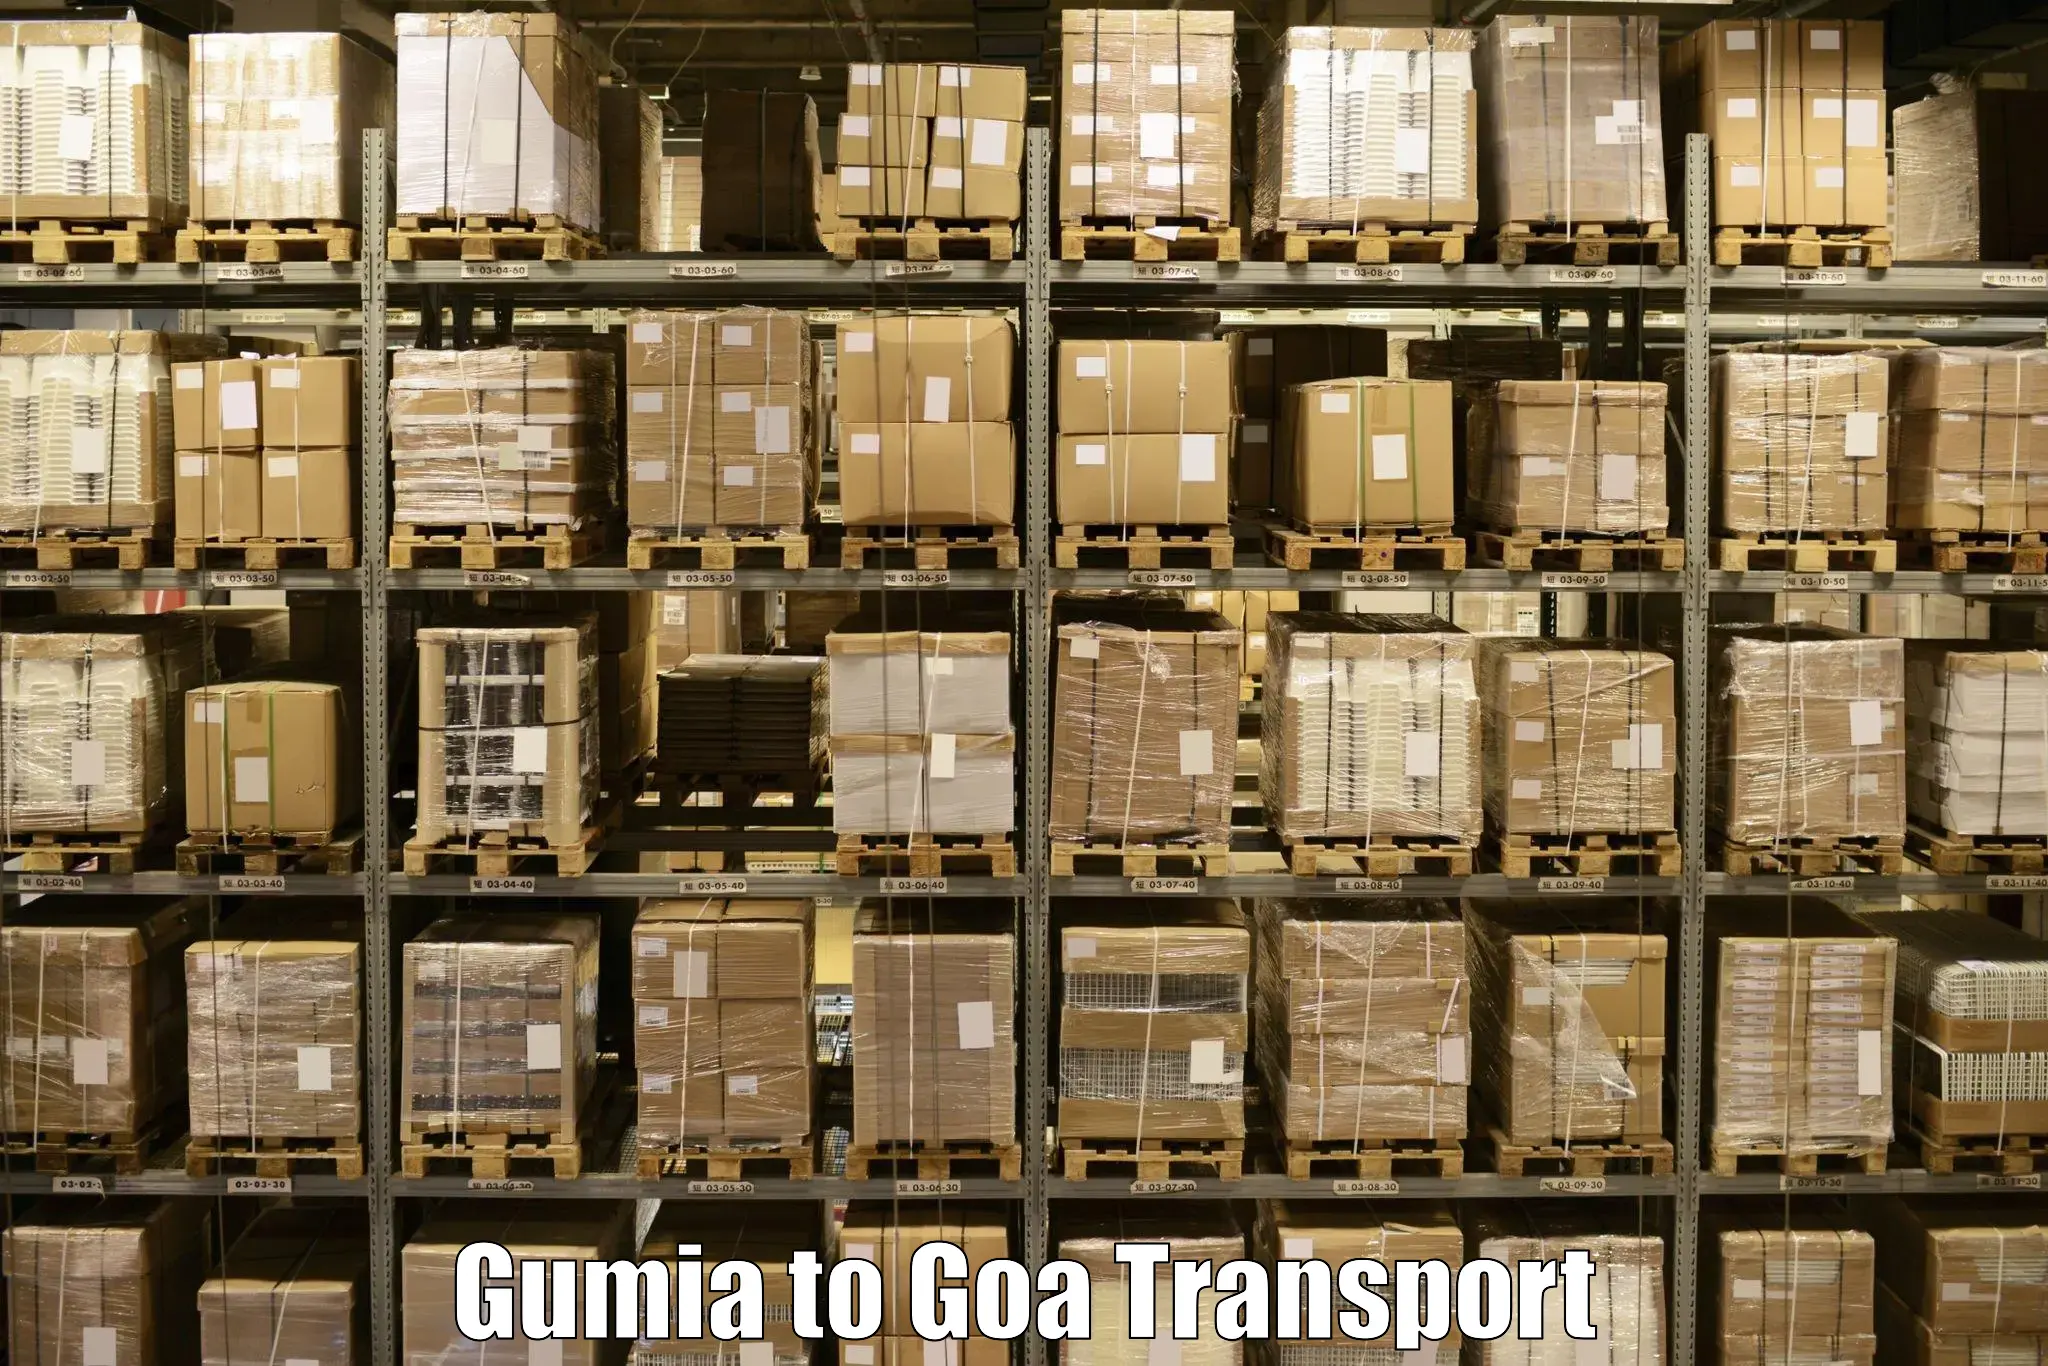 Transport bike from one state to another Gumia to Mormugao Port